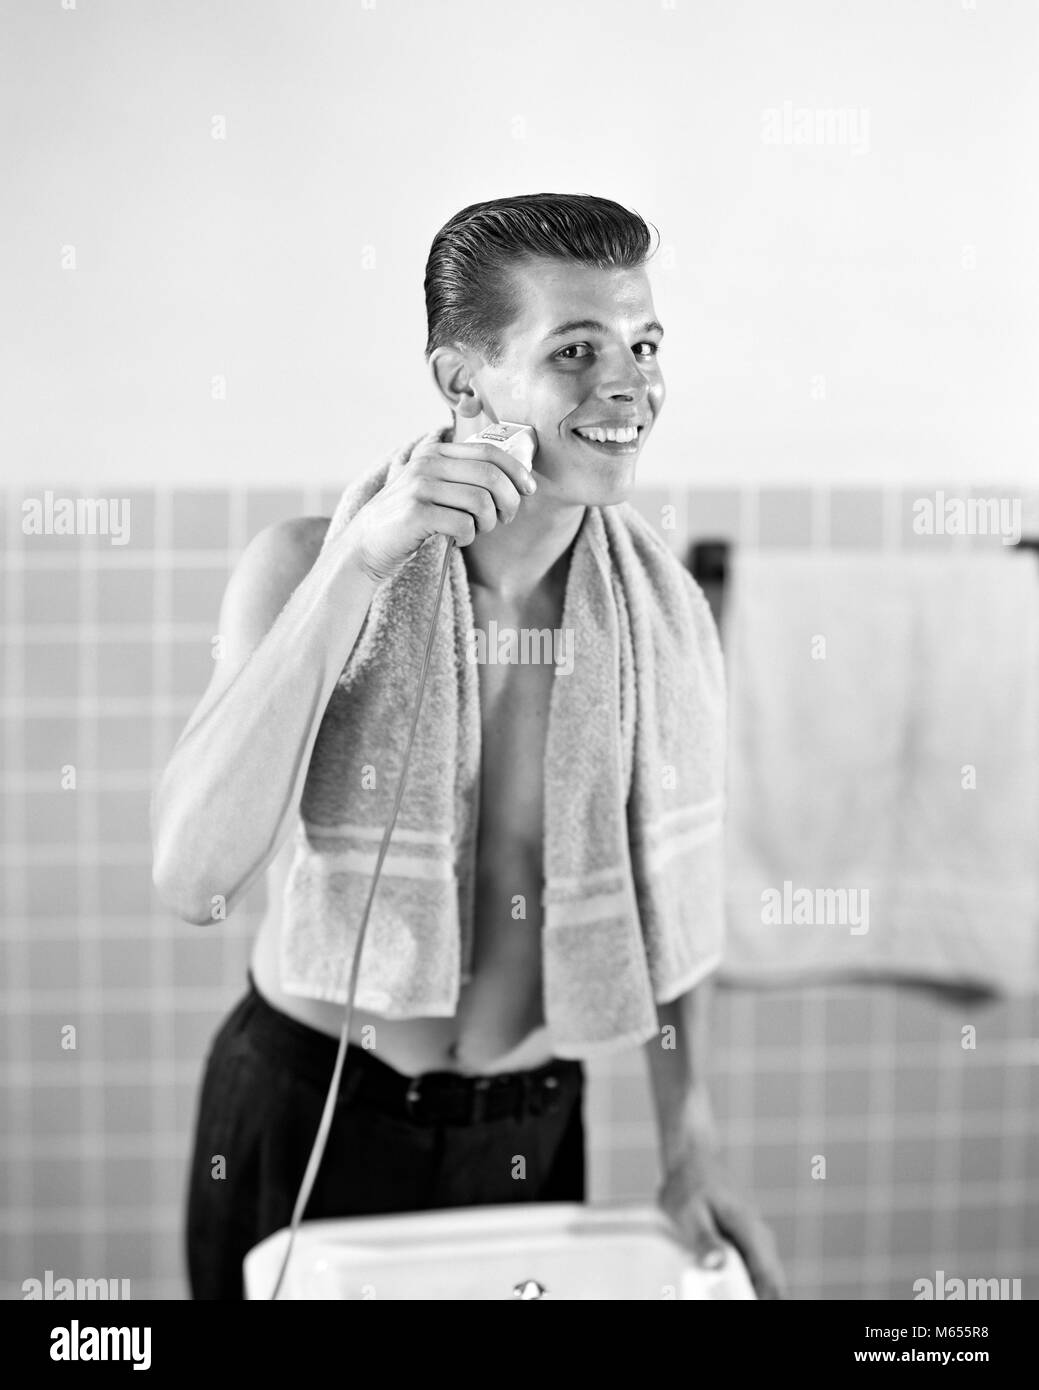 1950s SMILING TEENAGED BOY STANDING AT BATHROOM SINK SHAVING WITH ELECTRIC RAZOR LOOKING AT CAMERA - asp x16766 CAM001 HARS CONFIDENCE NOSTALGIA EYE CONTACT GROOMING HAPPINESS SHAVE TILE HYGIENE GROWTH SMILES TEENAGED JUVENILES MALES YOUNG ADULT MAN B&W BLACK AND WHITE CAUCASIAN ETHNICITY GOOD GROOMING LOOKING AT CAMERA LOOKING INTO MIRROR OLD FASHIONED PERSONS Stock Photo